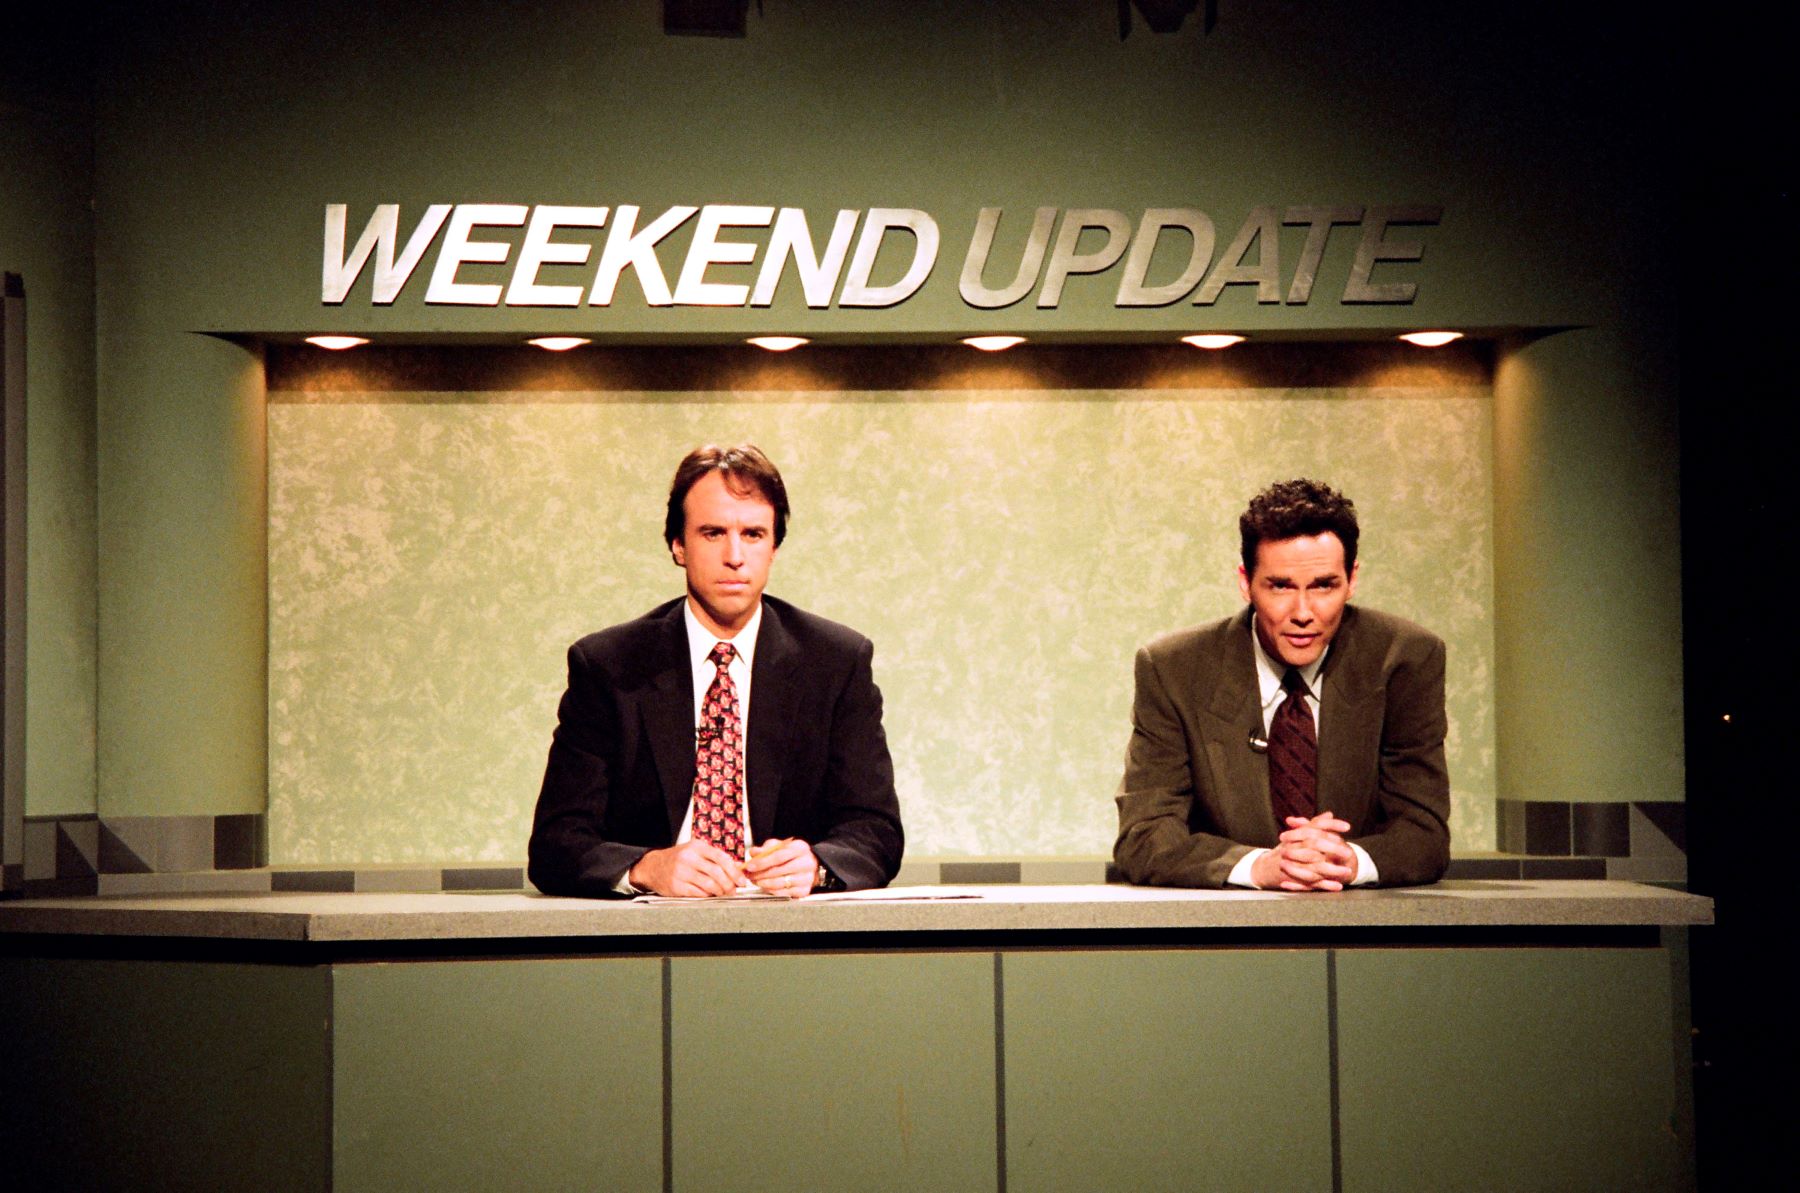 "Weekend Update" on 'SNL' featuring Kevin Nealon and Norm Macdonald